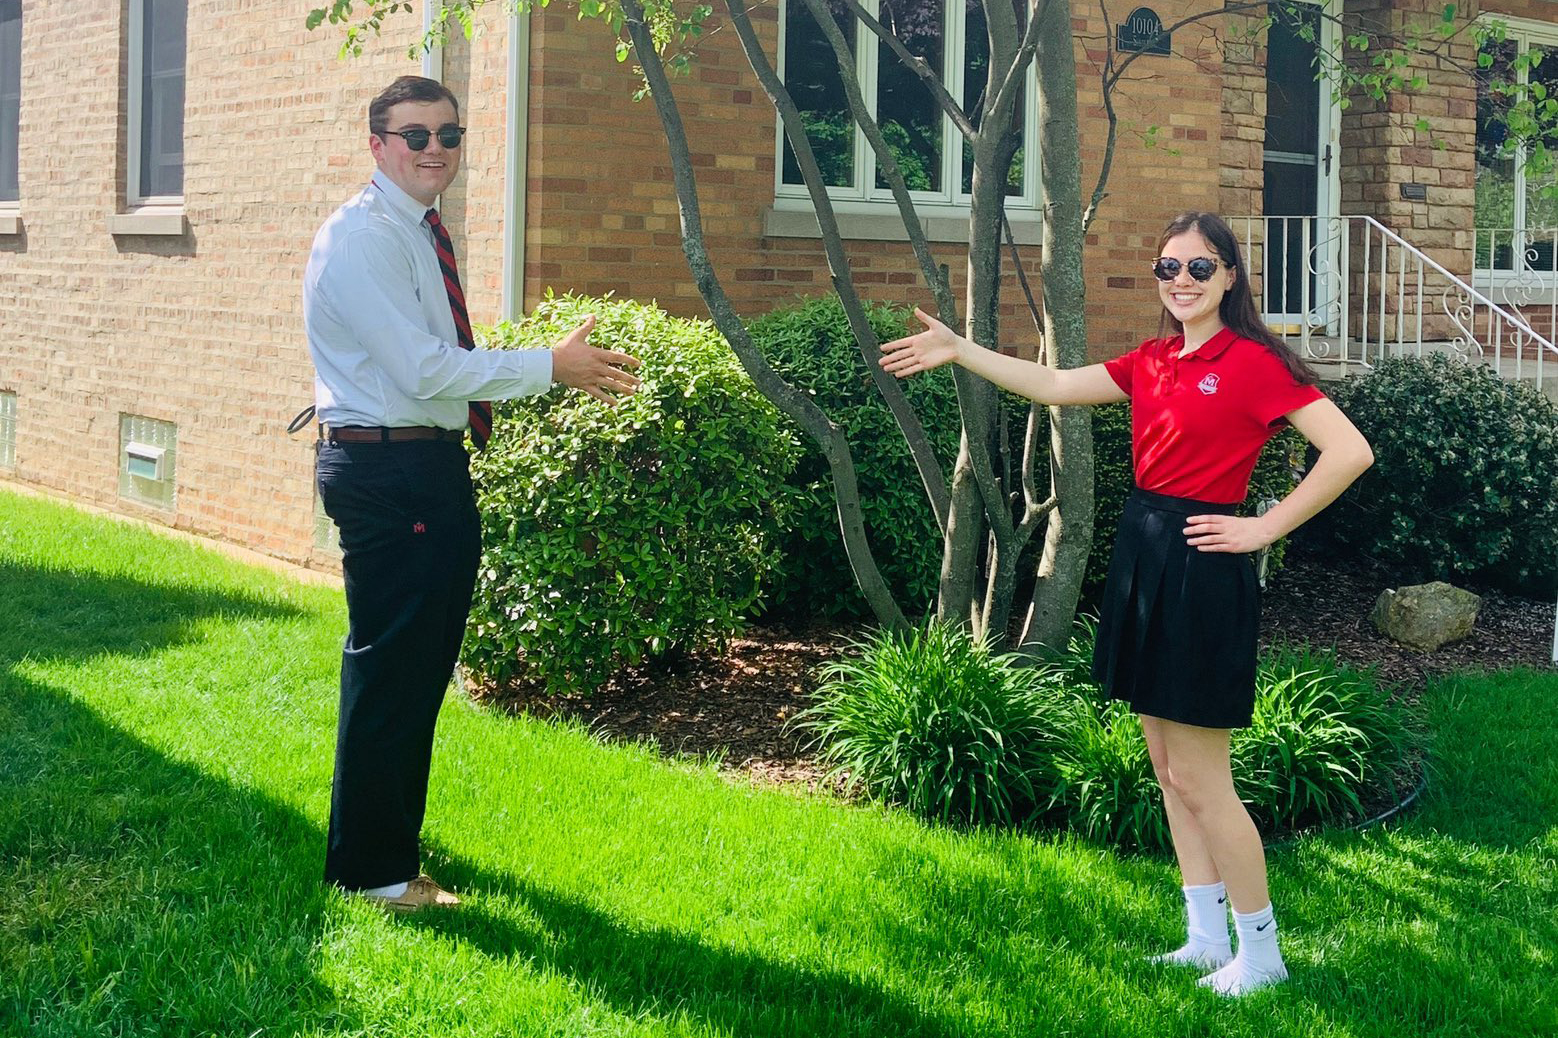 Chicago: New Student Council Vice President Sarah Hughes and President Jack Harmon